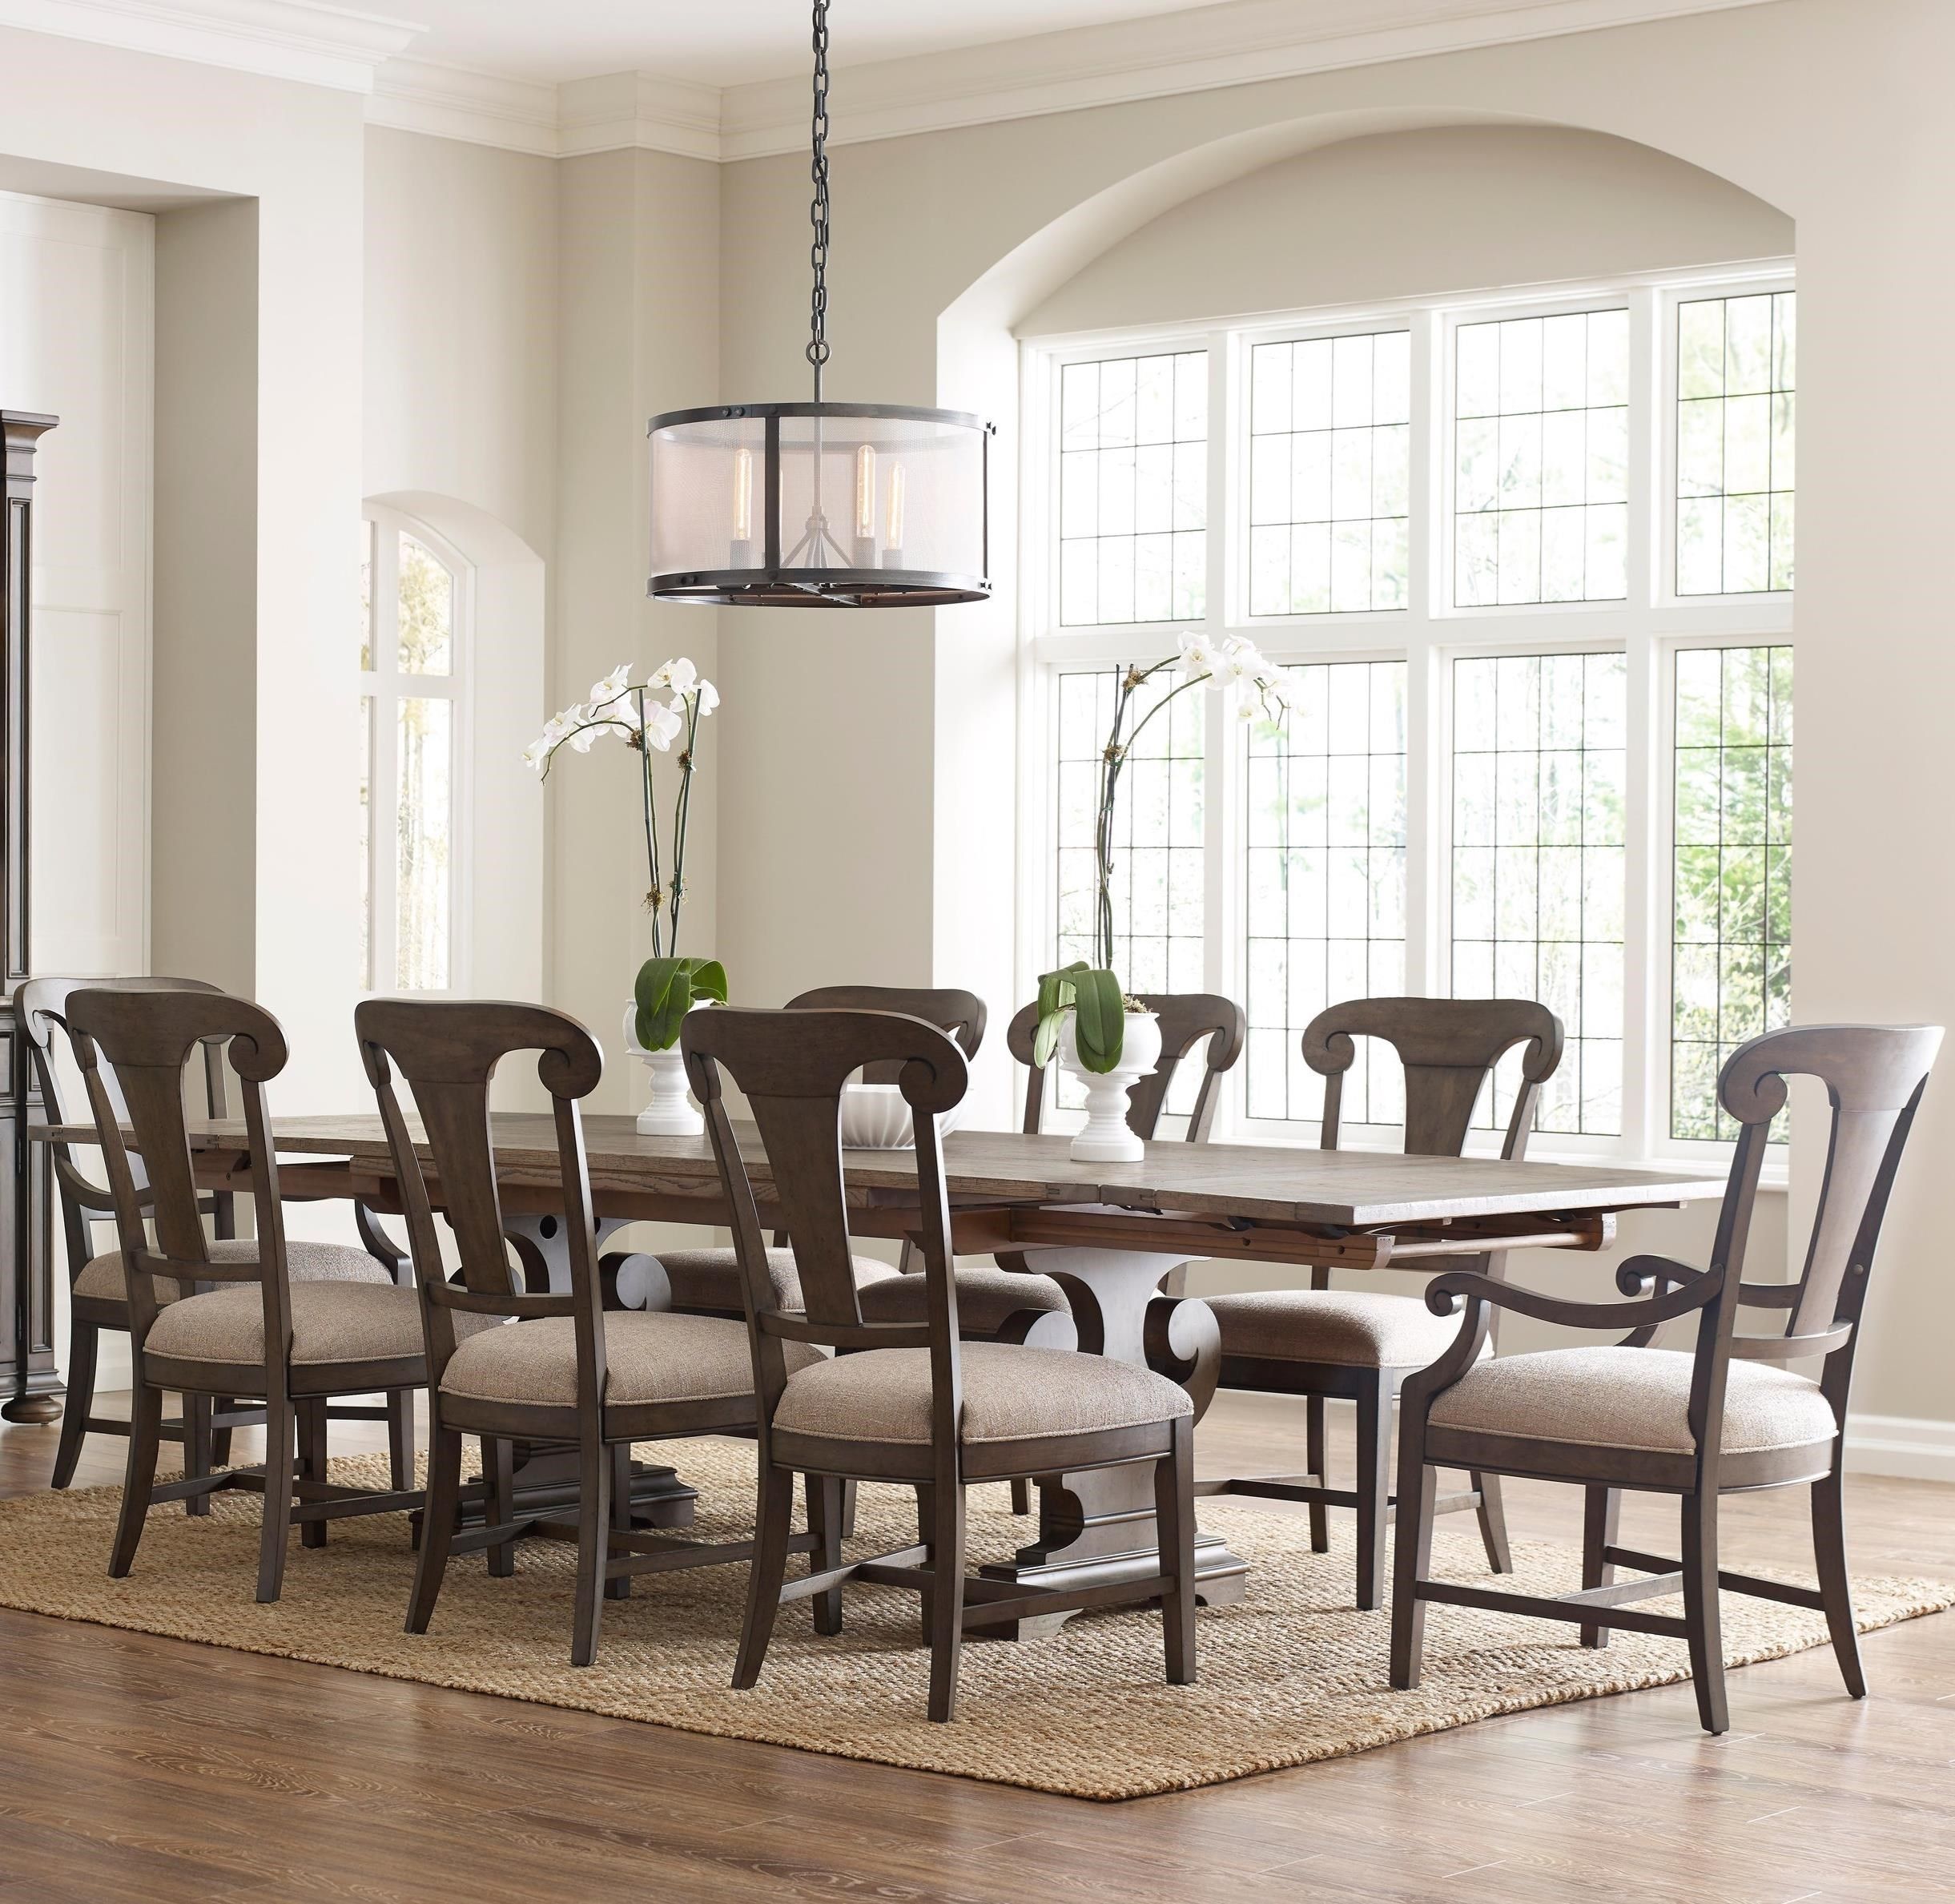 Kincaid Furniture Greyson Nine Piece Dining Set With Crawford With Regard To Most Current Crawford 6 Piece Rectangle Dining Sets (View 12 of 20)